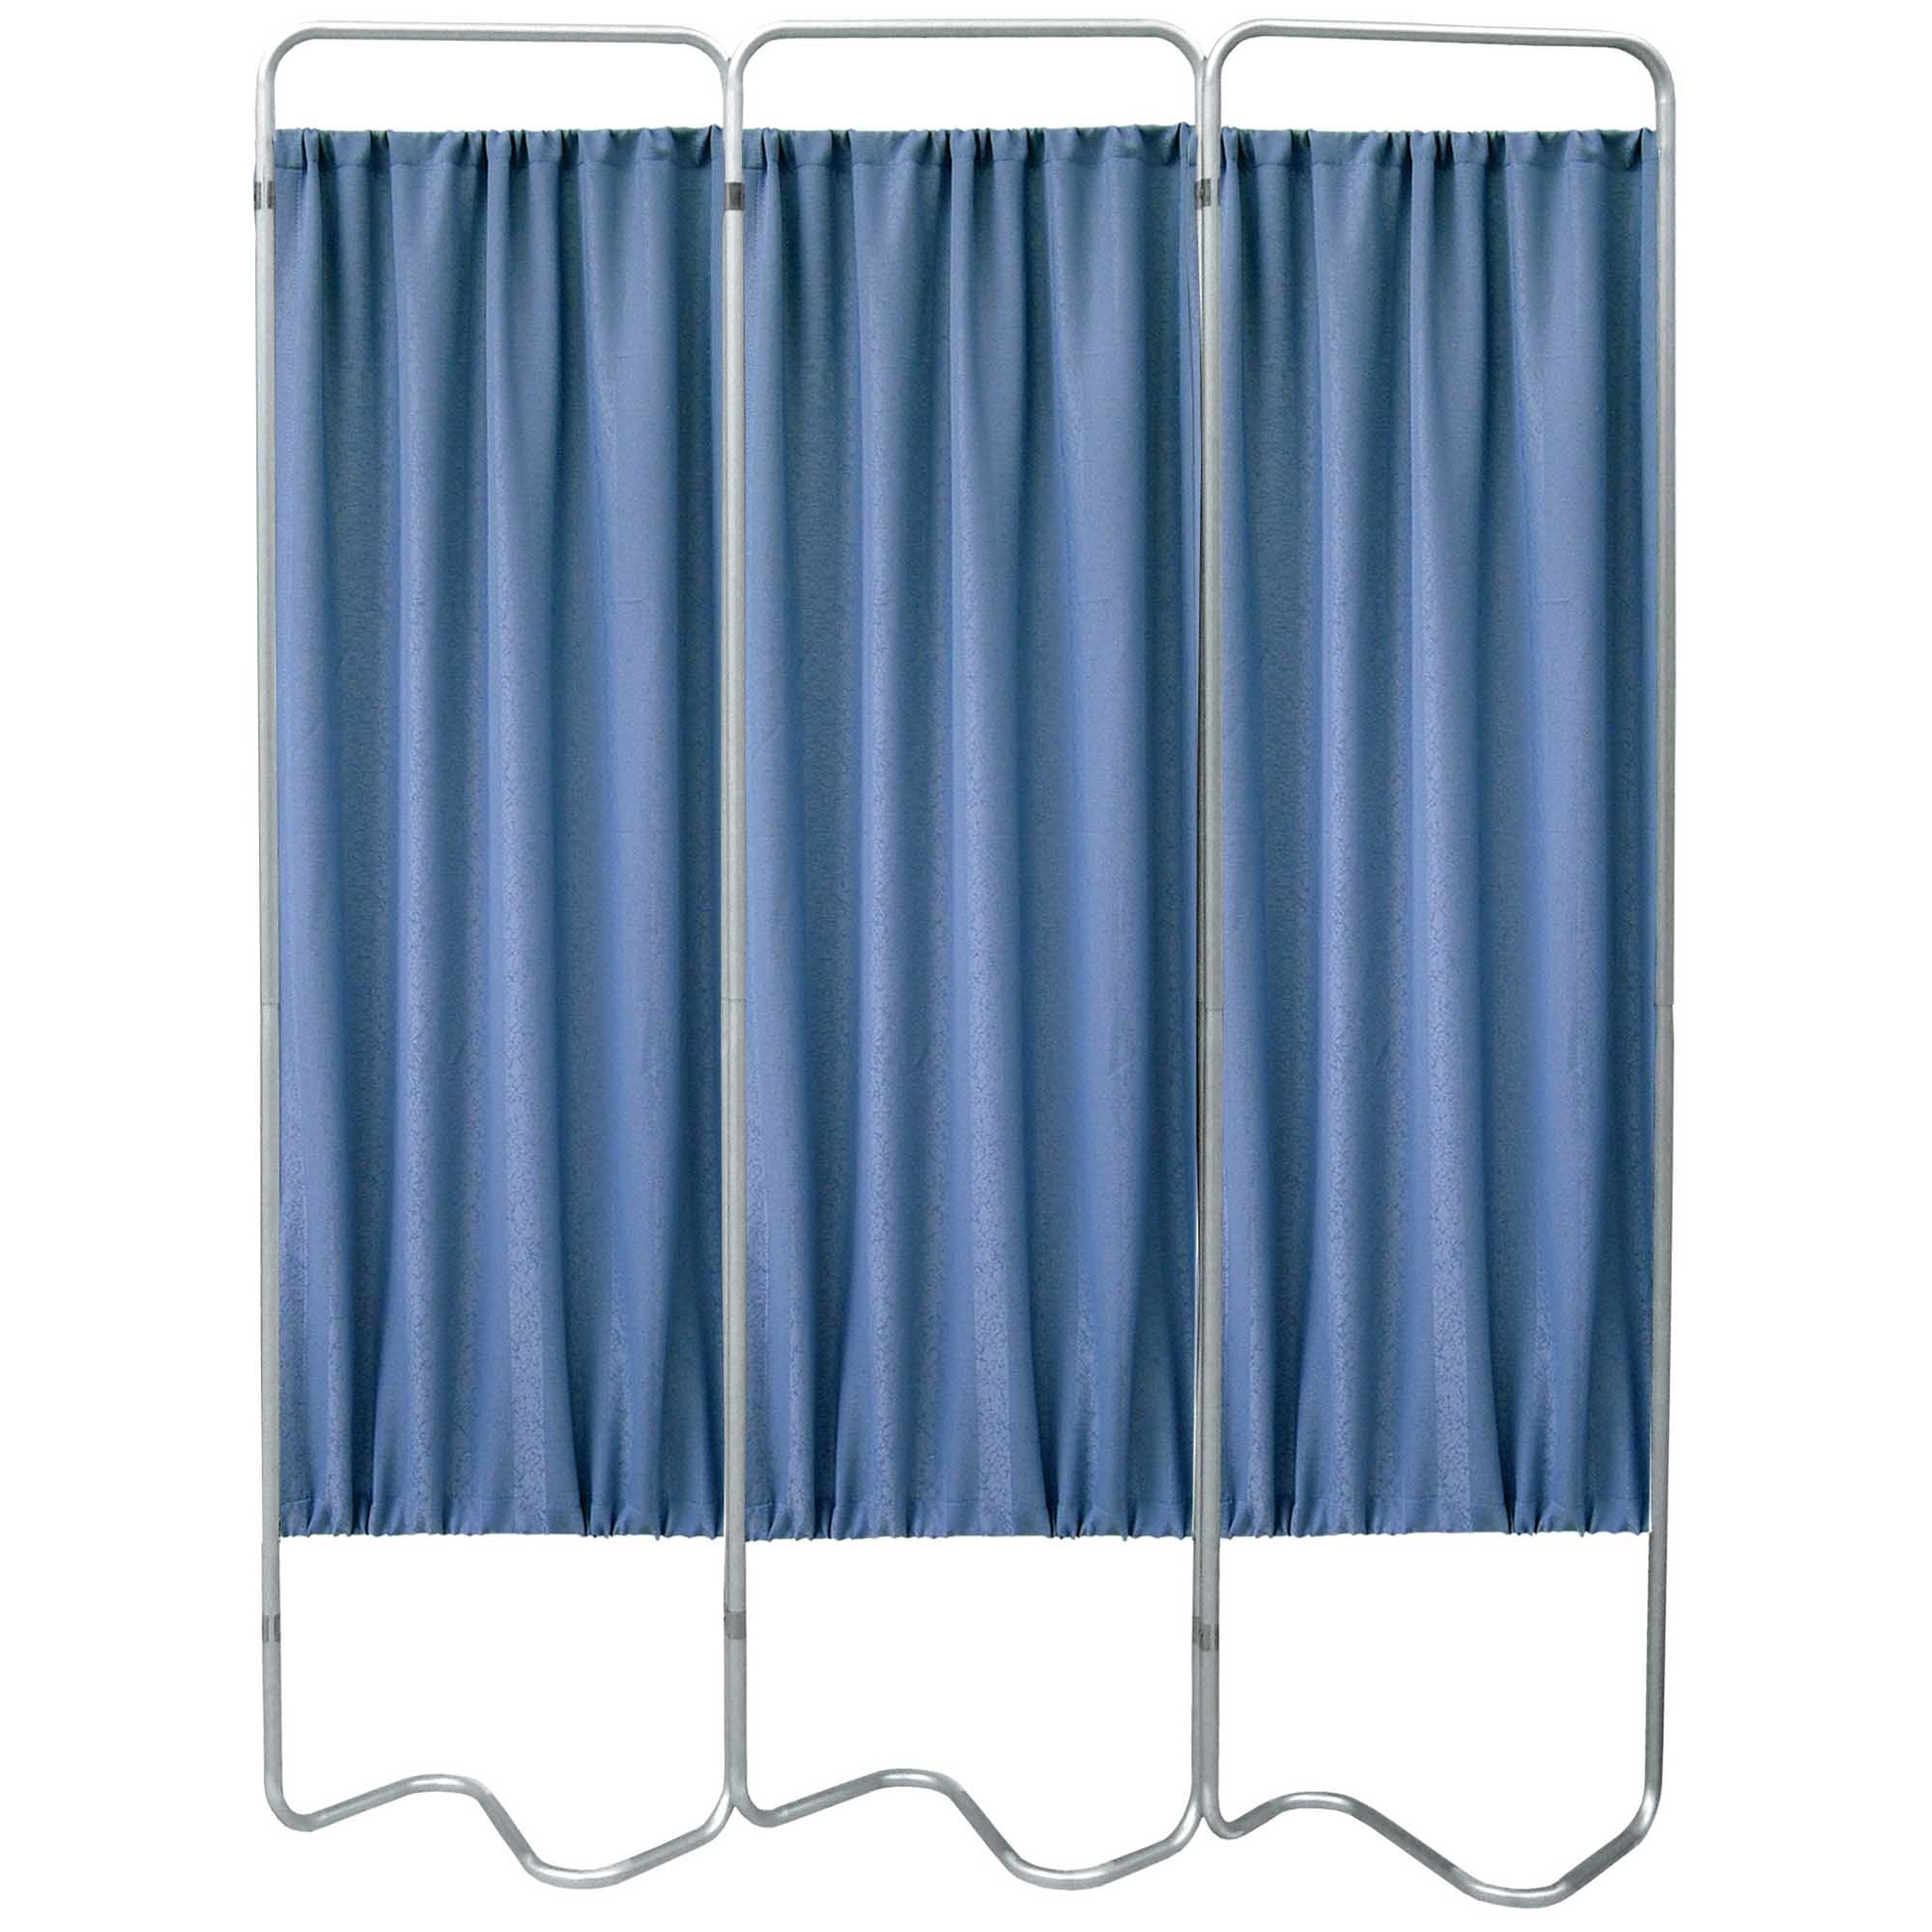 Beamatic 3 Section Folding Privacy Screen - Norway Designer Cloth Screen Panel